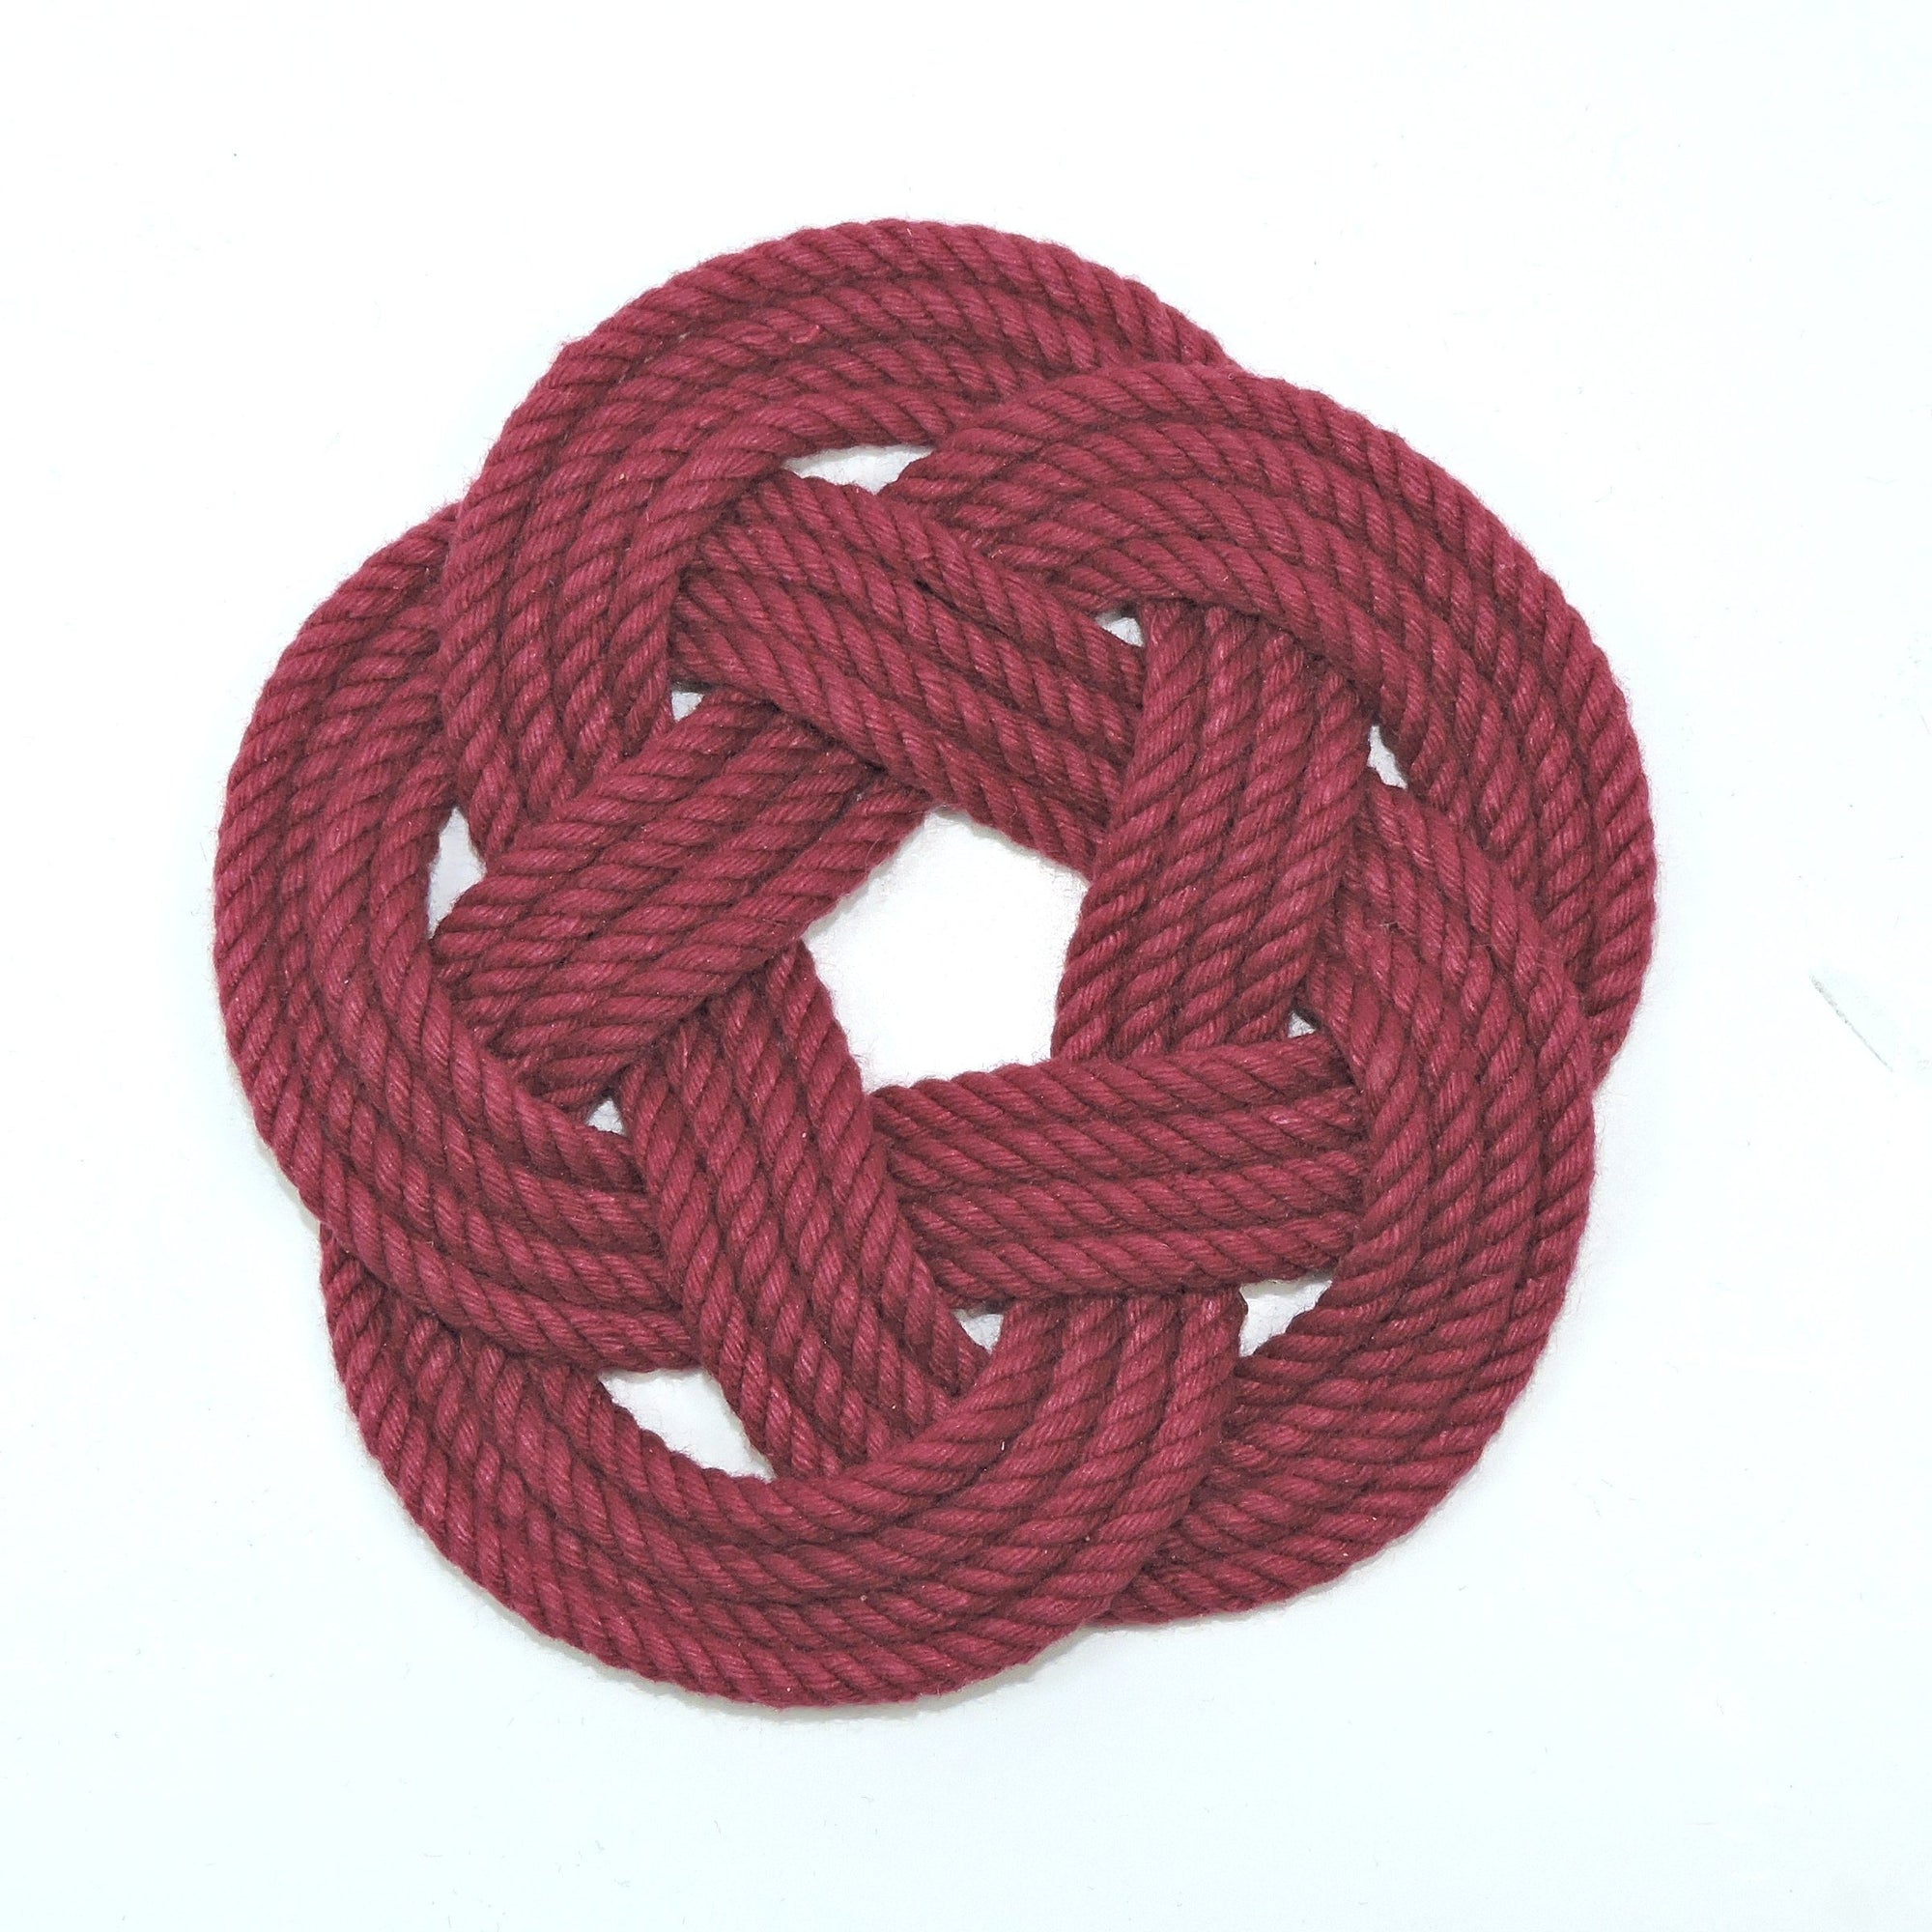 Nautical Knot Sailor Knot Coasters, woven in Burgundy , Set of 4 handmade at Mystic Knotwork